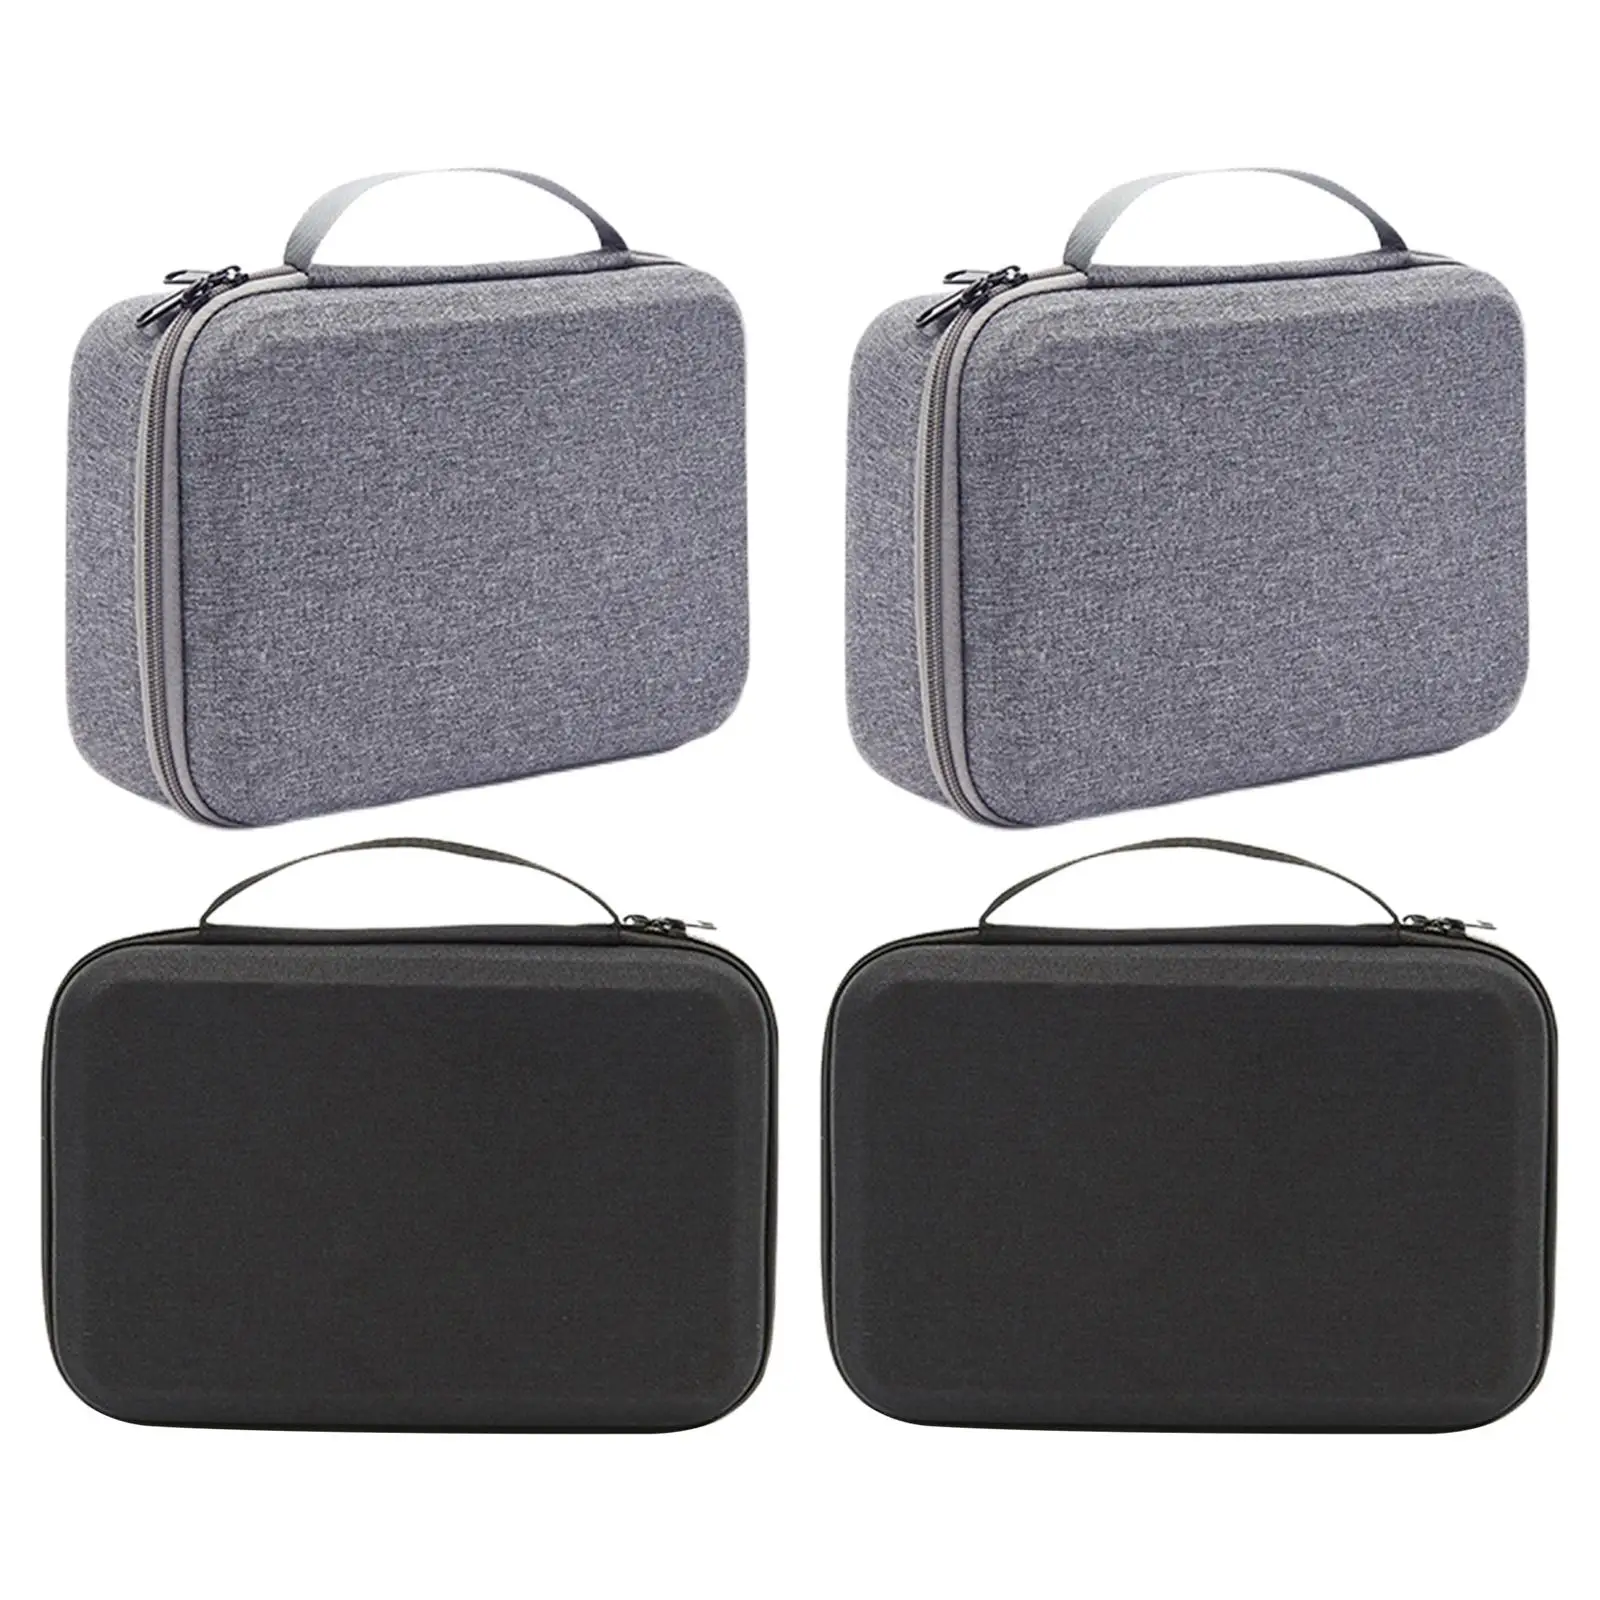 Drone Carrying Case Protective Storage Case Remote Control Bag Wear Resistant Storage Bag for DJI Mini 3 Pro Drone Accessories